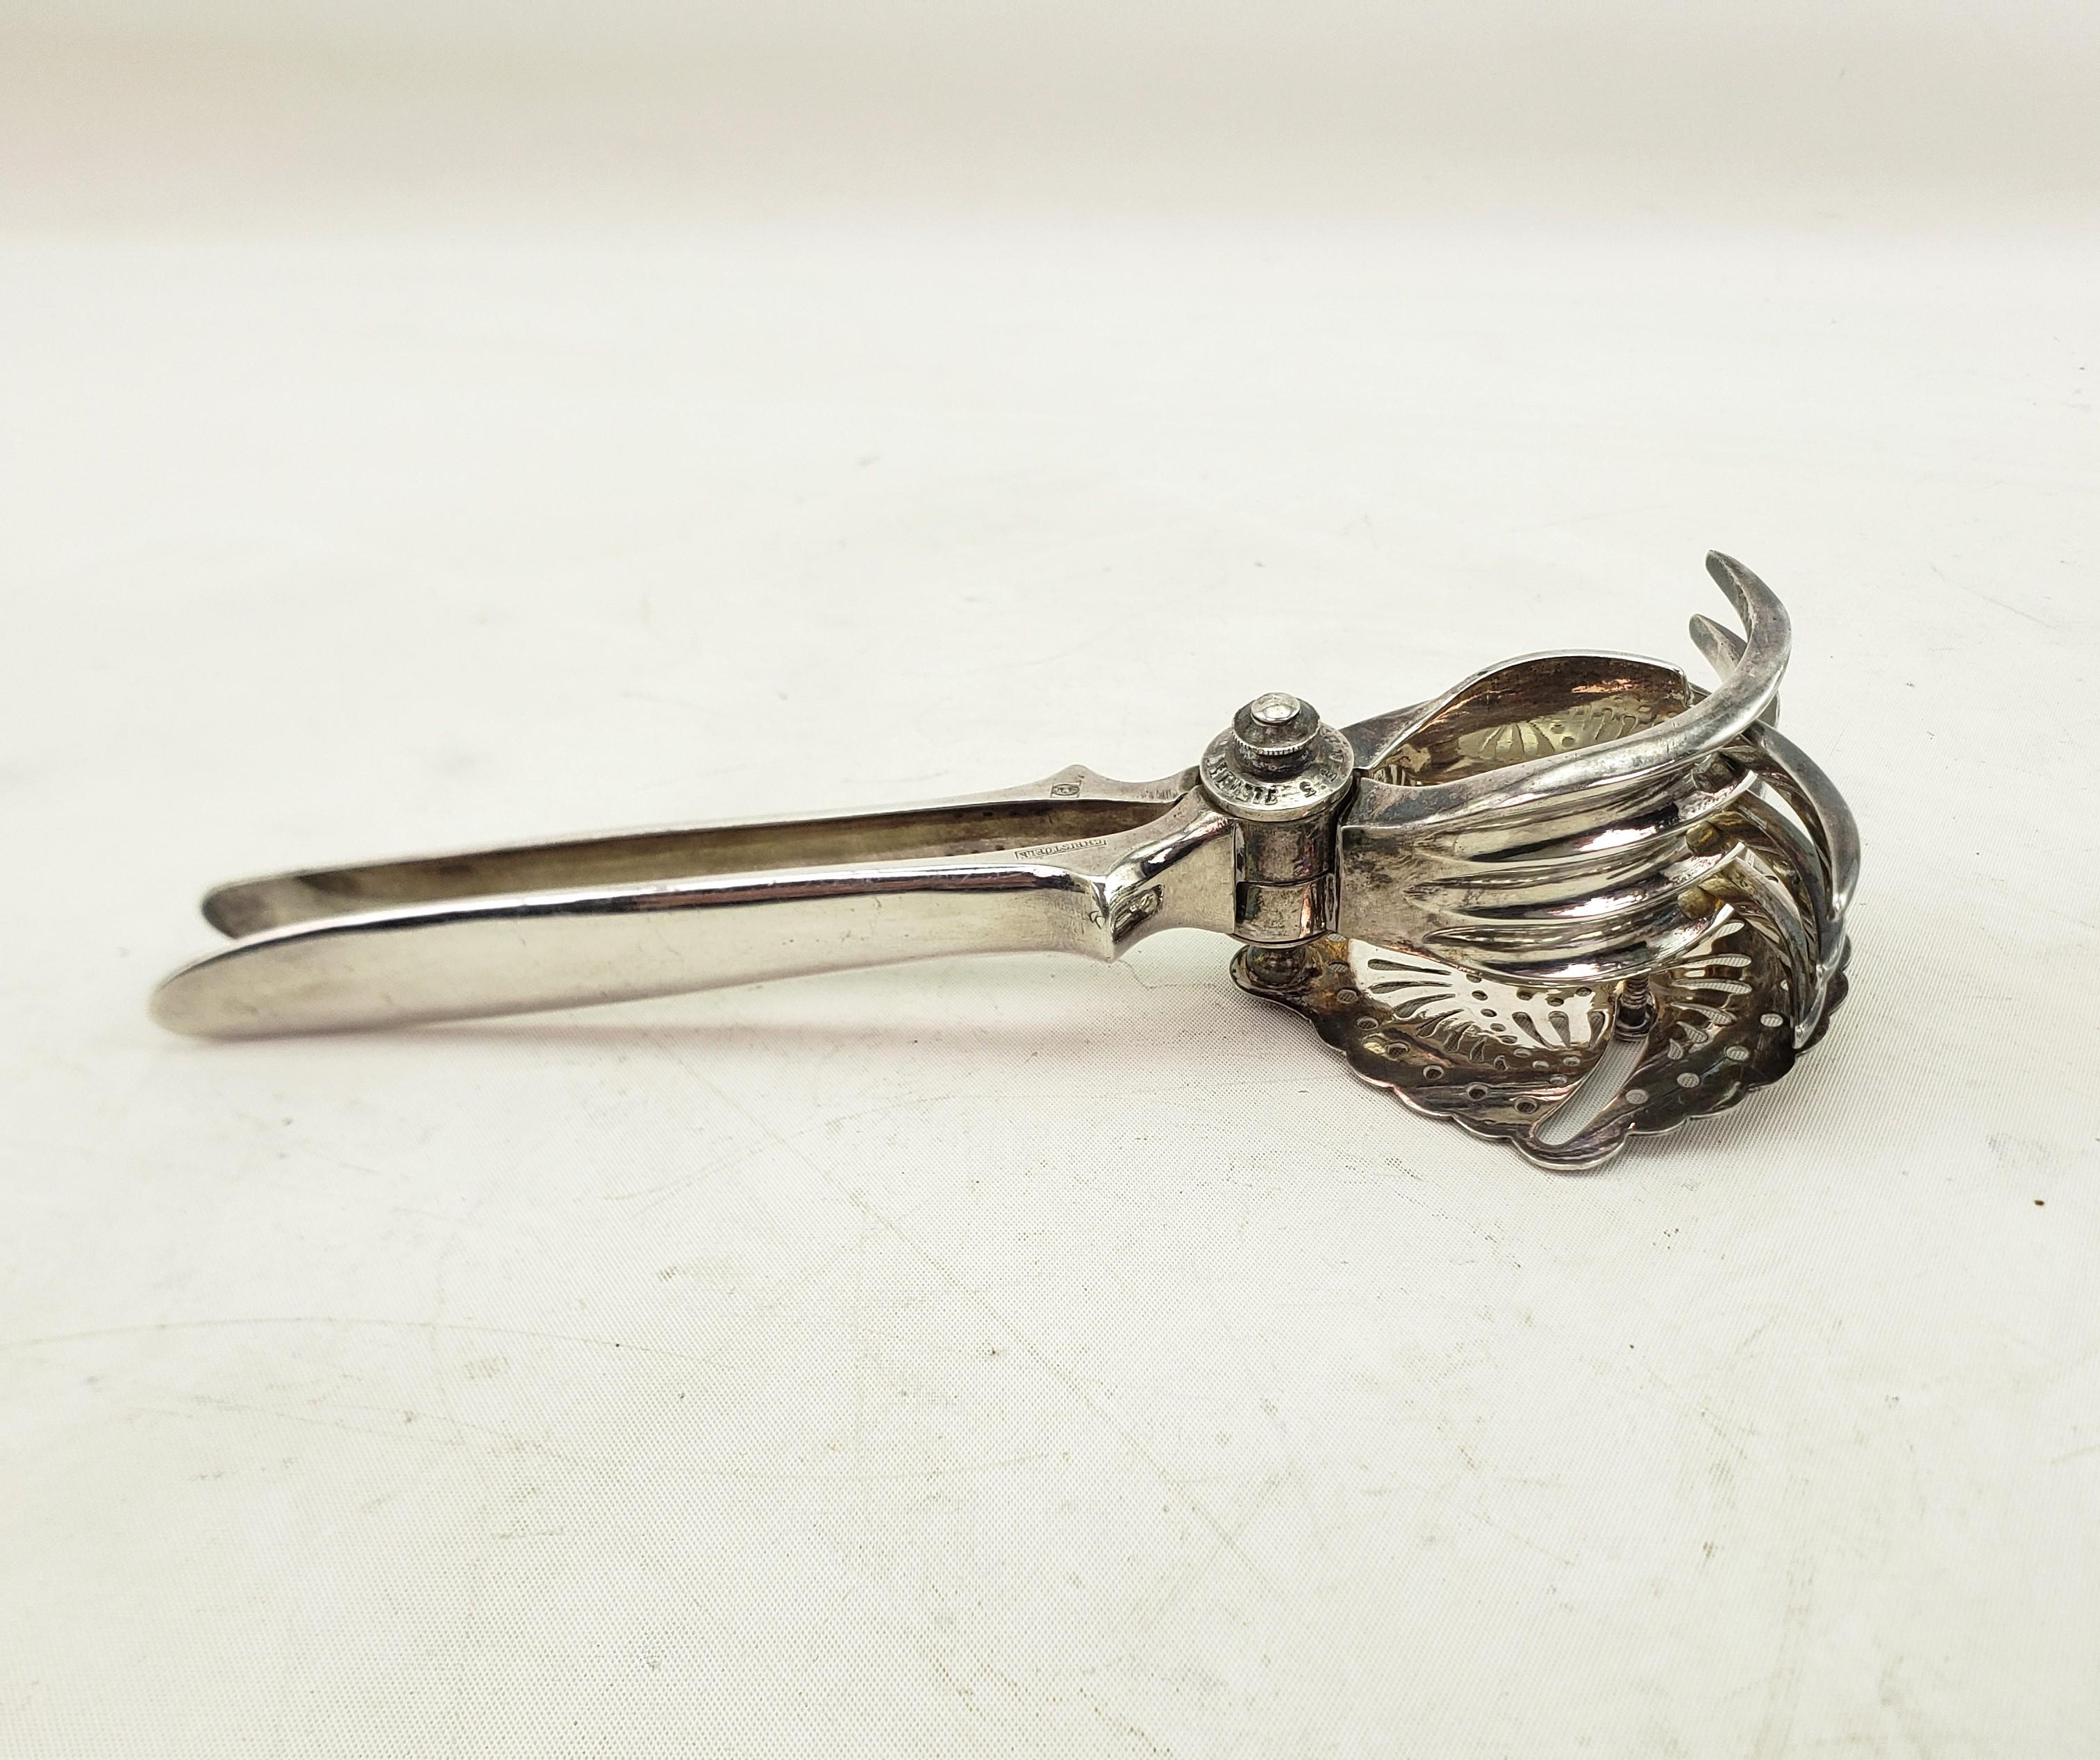 Machine-Made Christofle Antique Silver Plated Citrus Hand Press or Lemon Squeezer For Sale